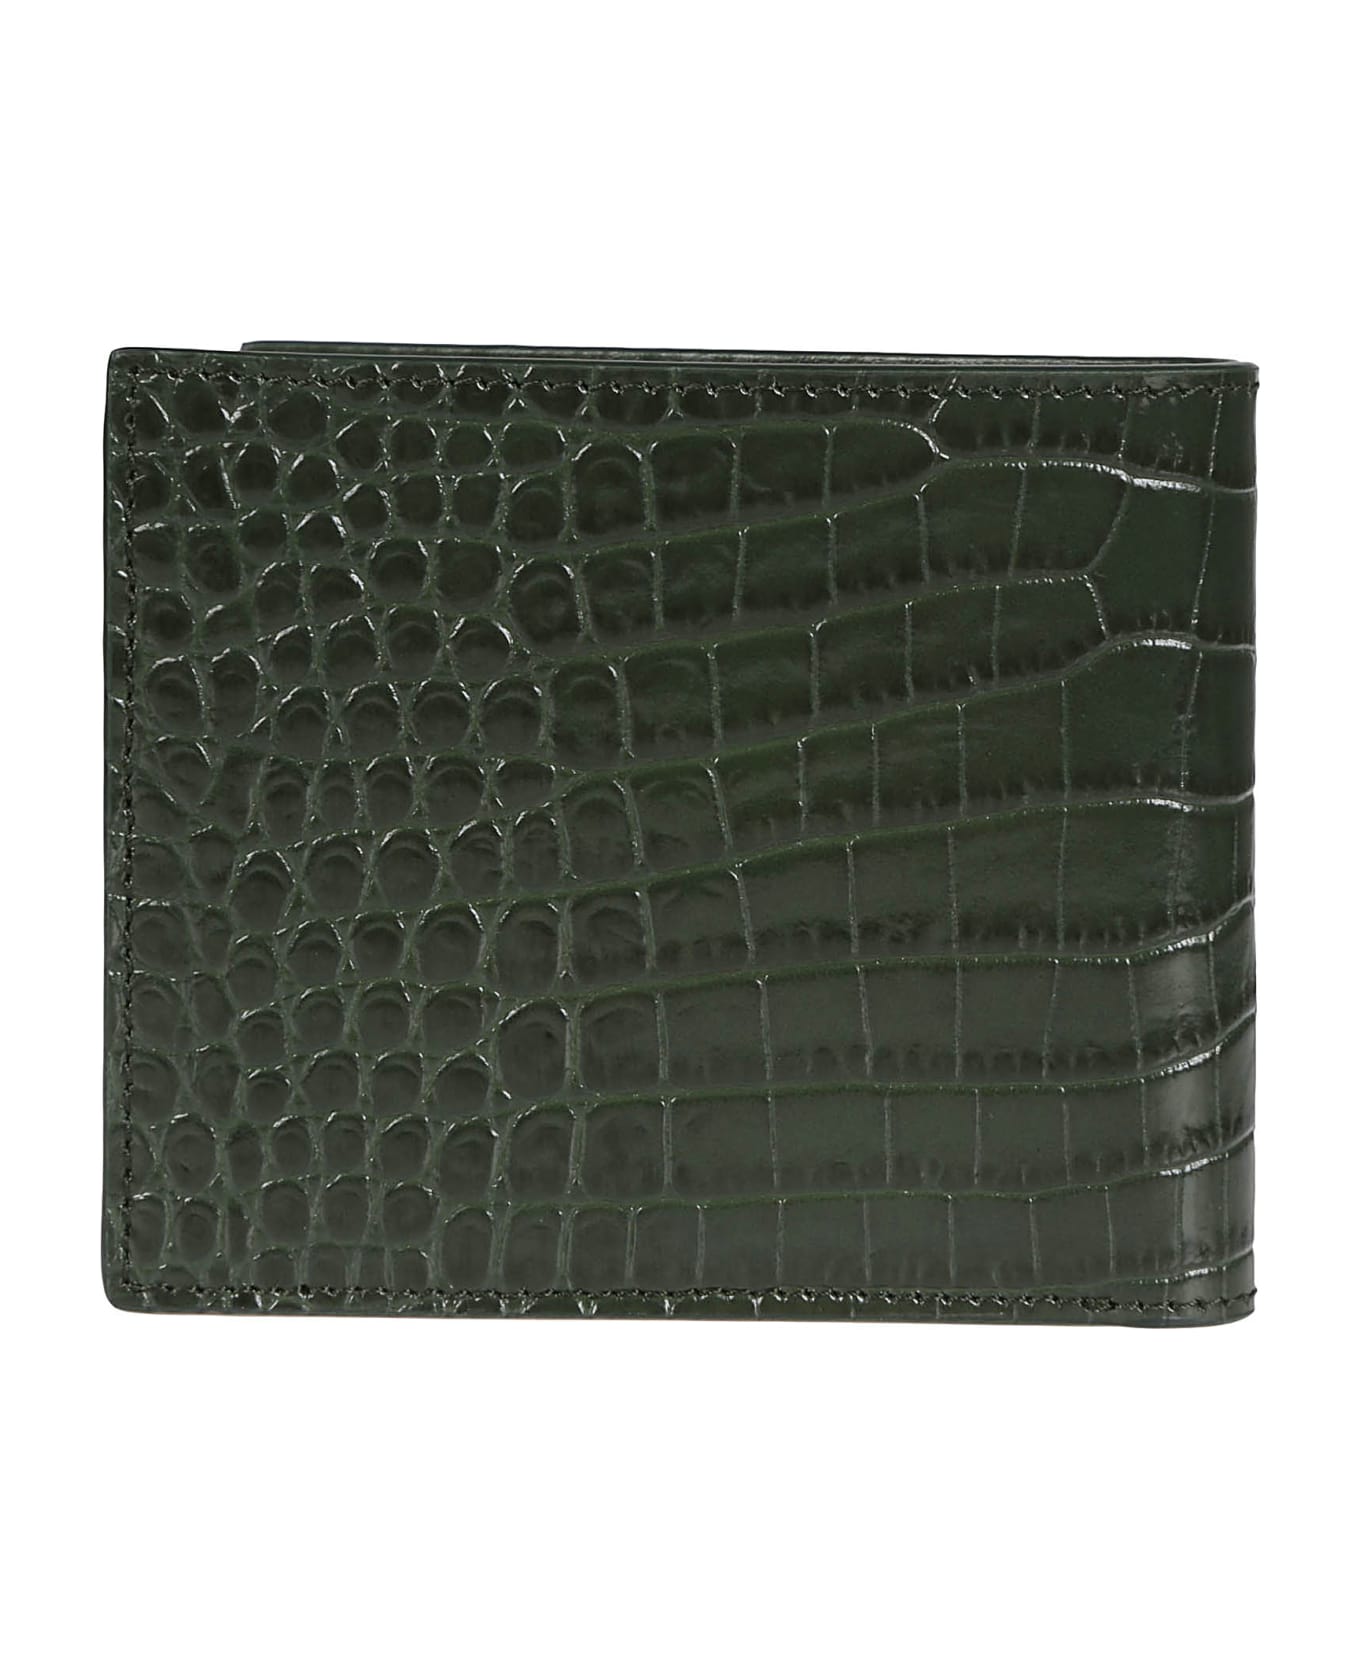 Tom Ford Printed Alligator Classic Bifold Wallet - Rifle Green